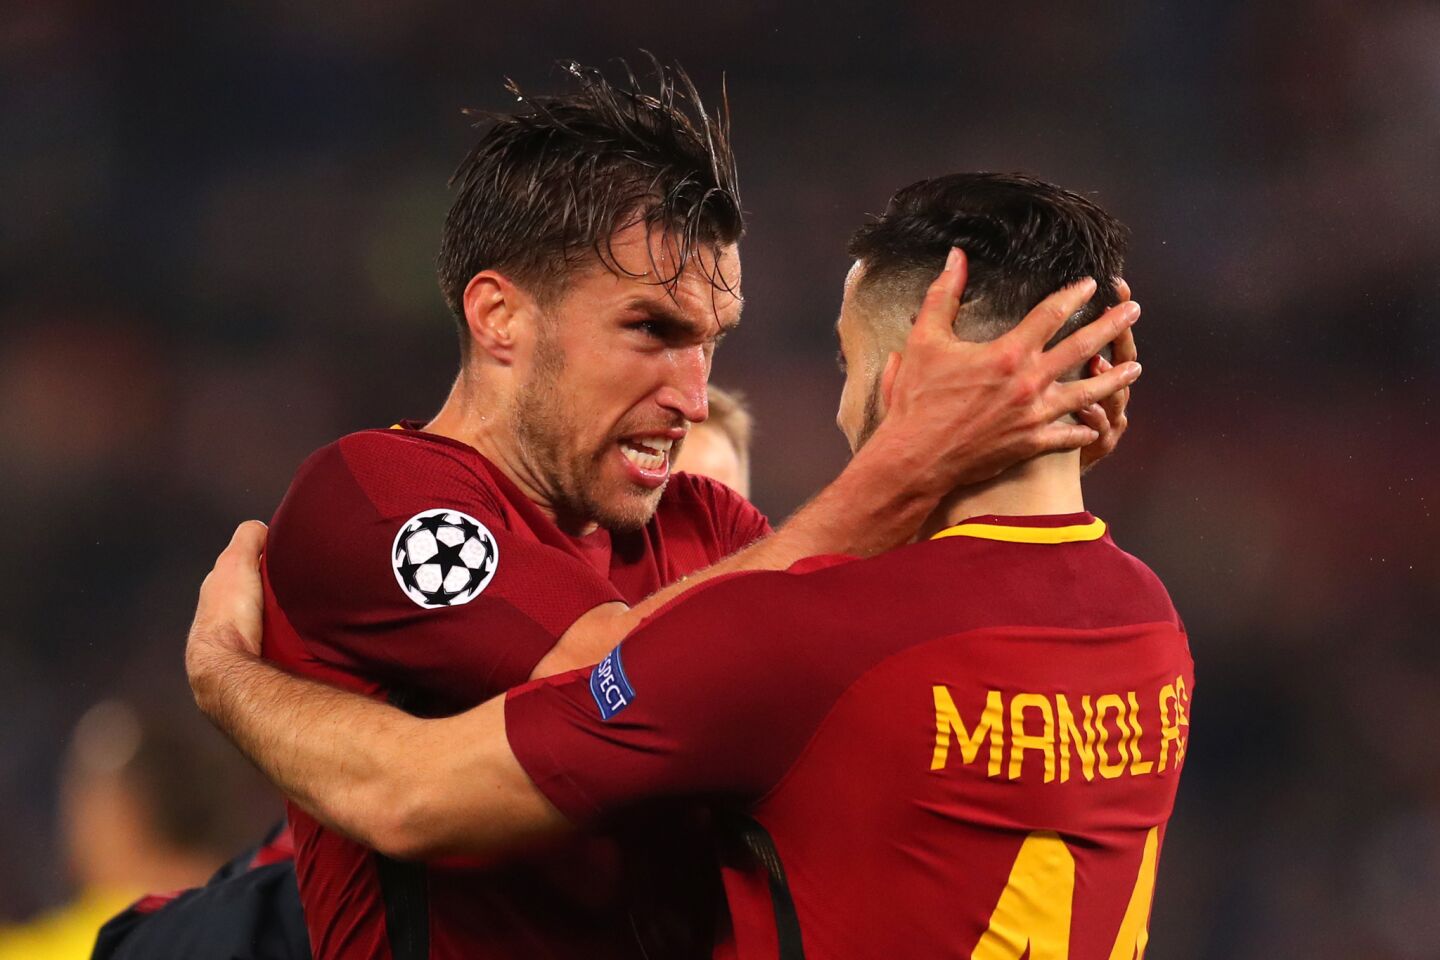 ROME, ITALY - APRIL 10: Kevin Strootman of AS Roma and Kostas Manolas of AS Roma celebrate at the full time whistle during the UEFA Champions League Quarter Final Second Leg match between AS Roma and FC Barcelona at Stadio Olimpico on April 10, 2018 in Rome, Italy.